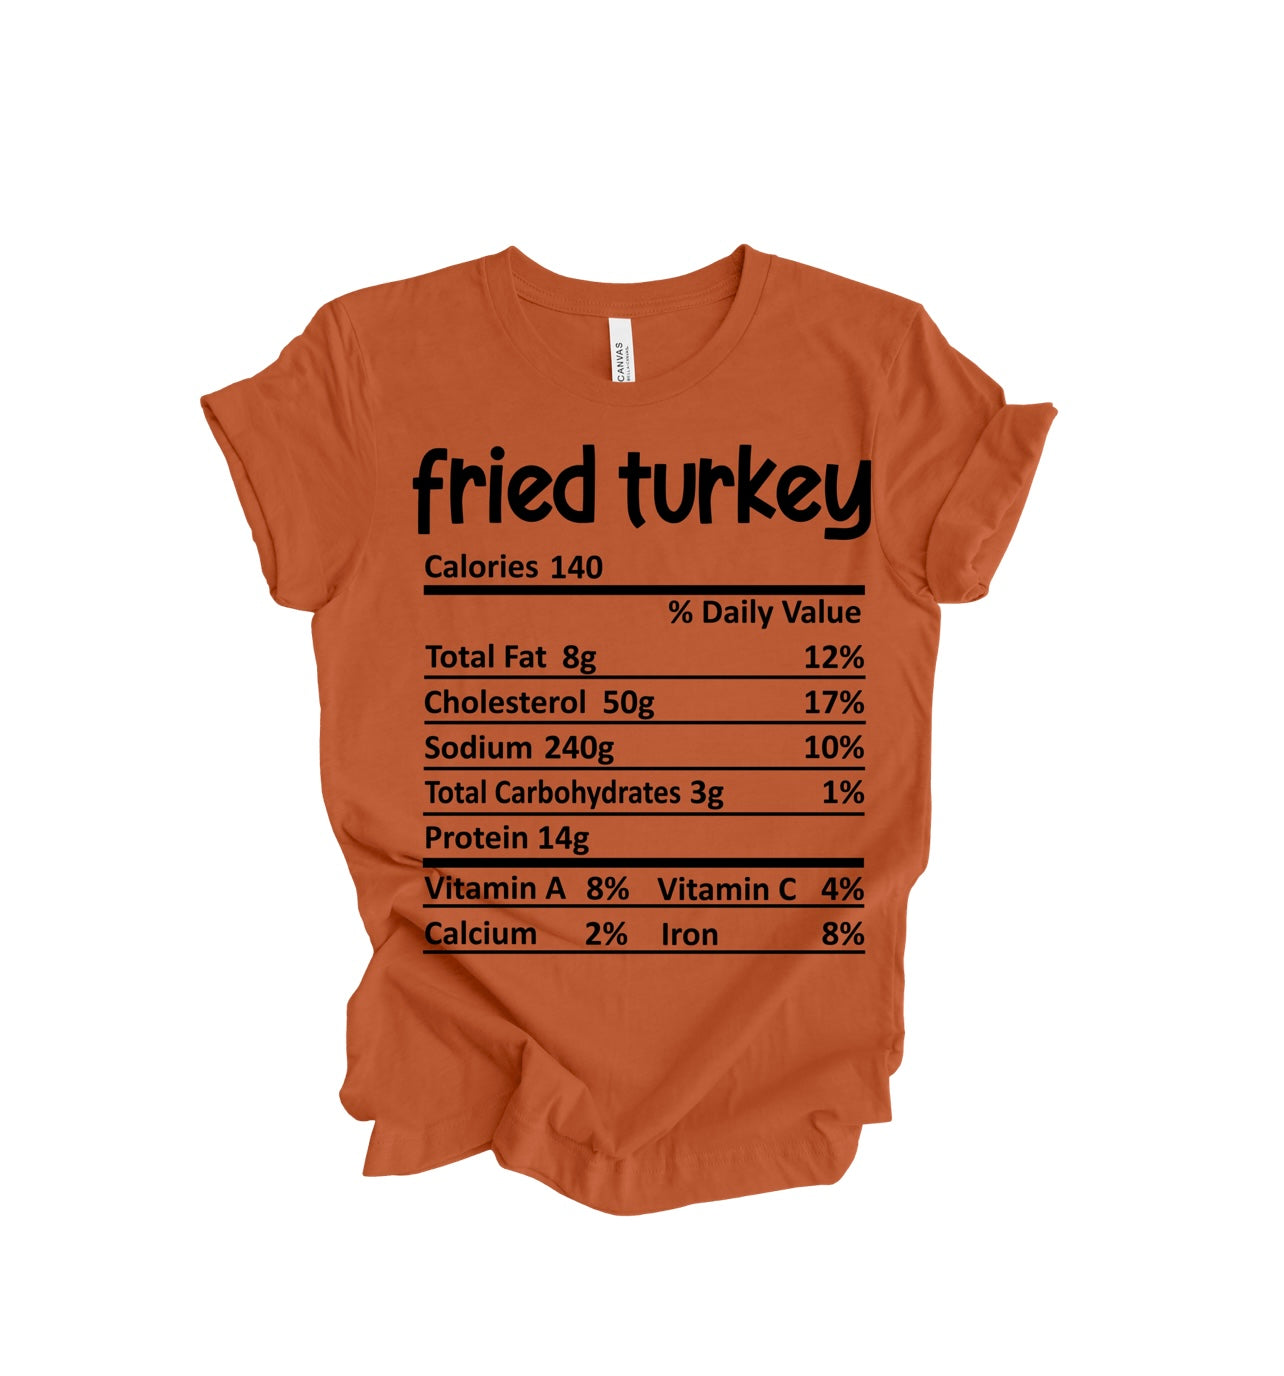 Fried Turkey Nutritional Facts